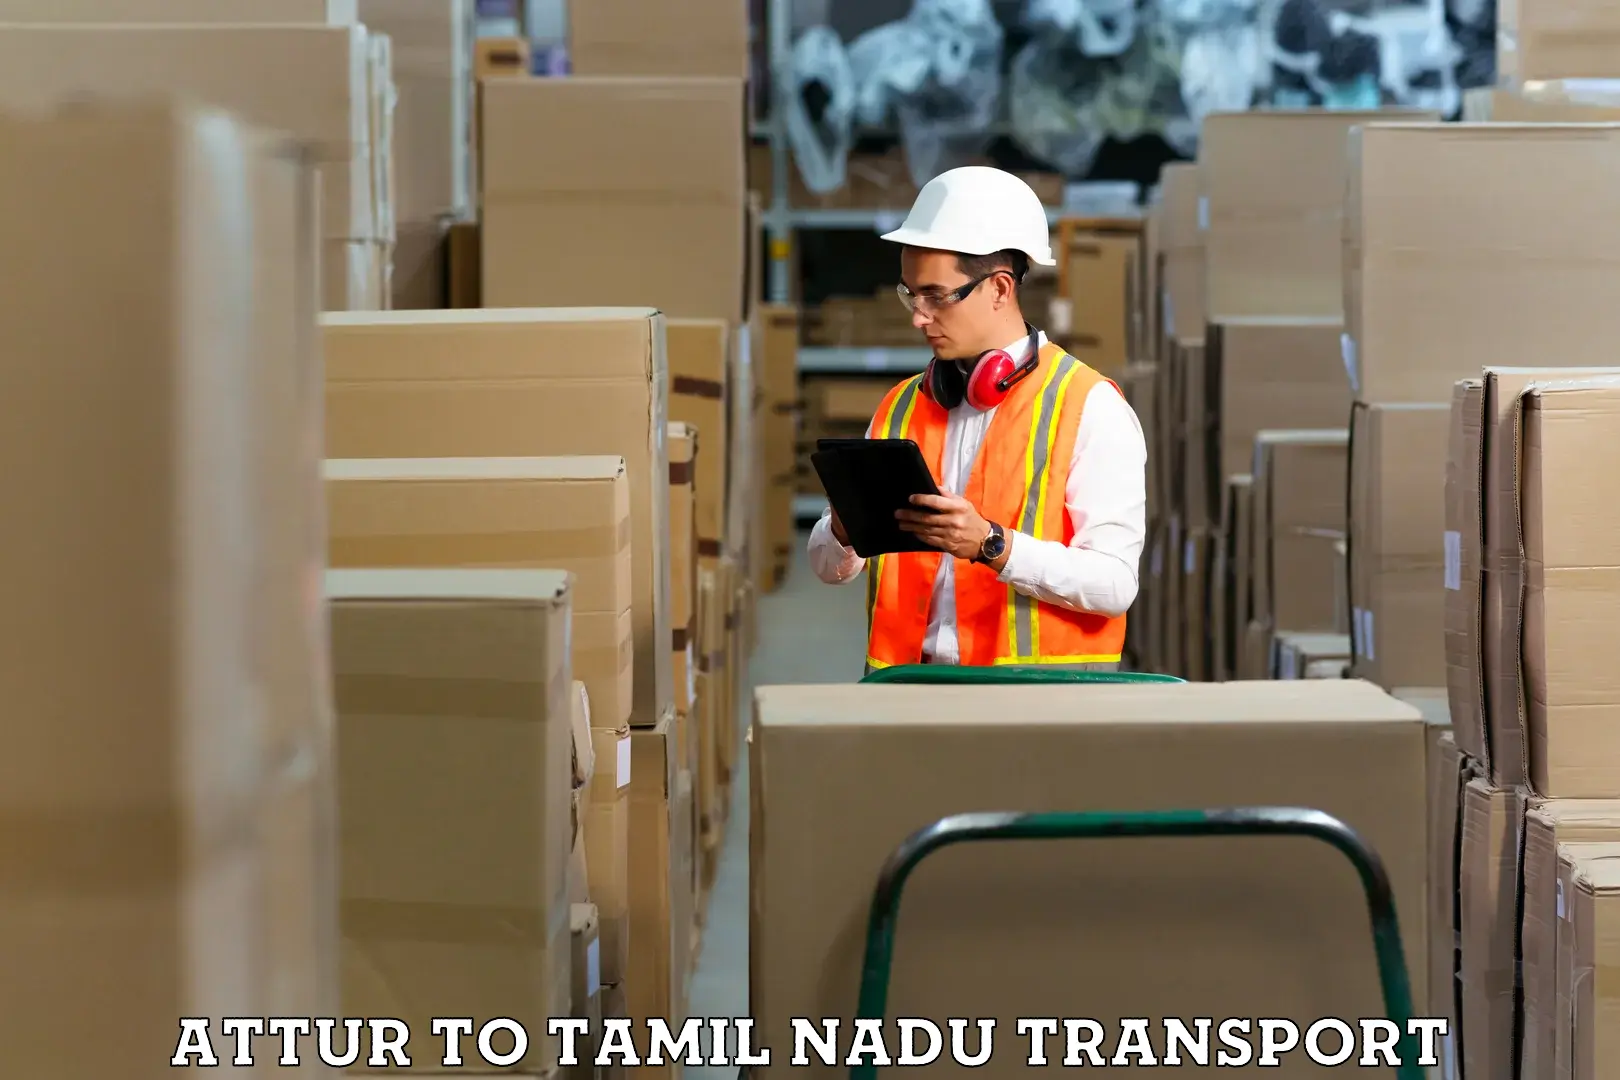 Nationwide transport services Attur to Periyakulam